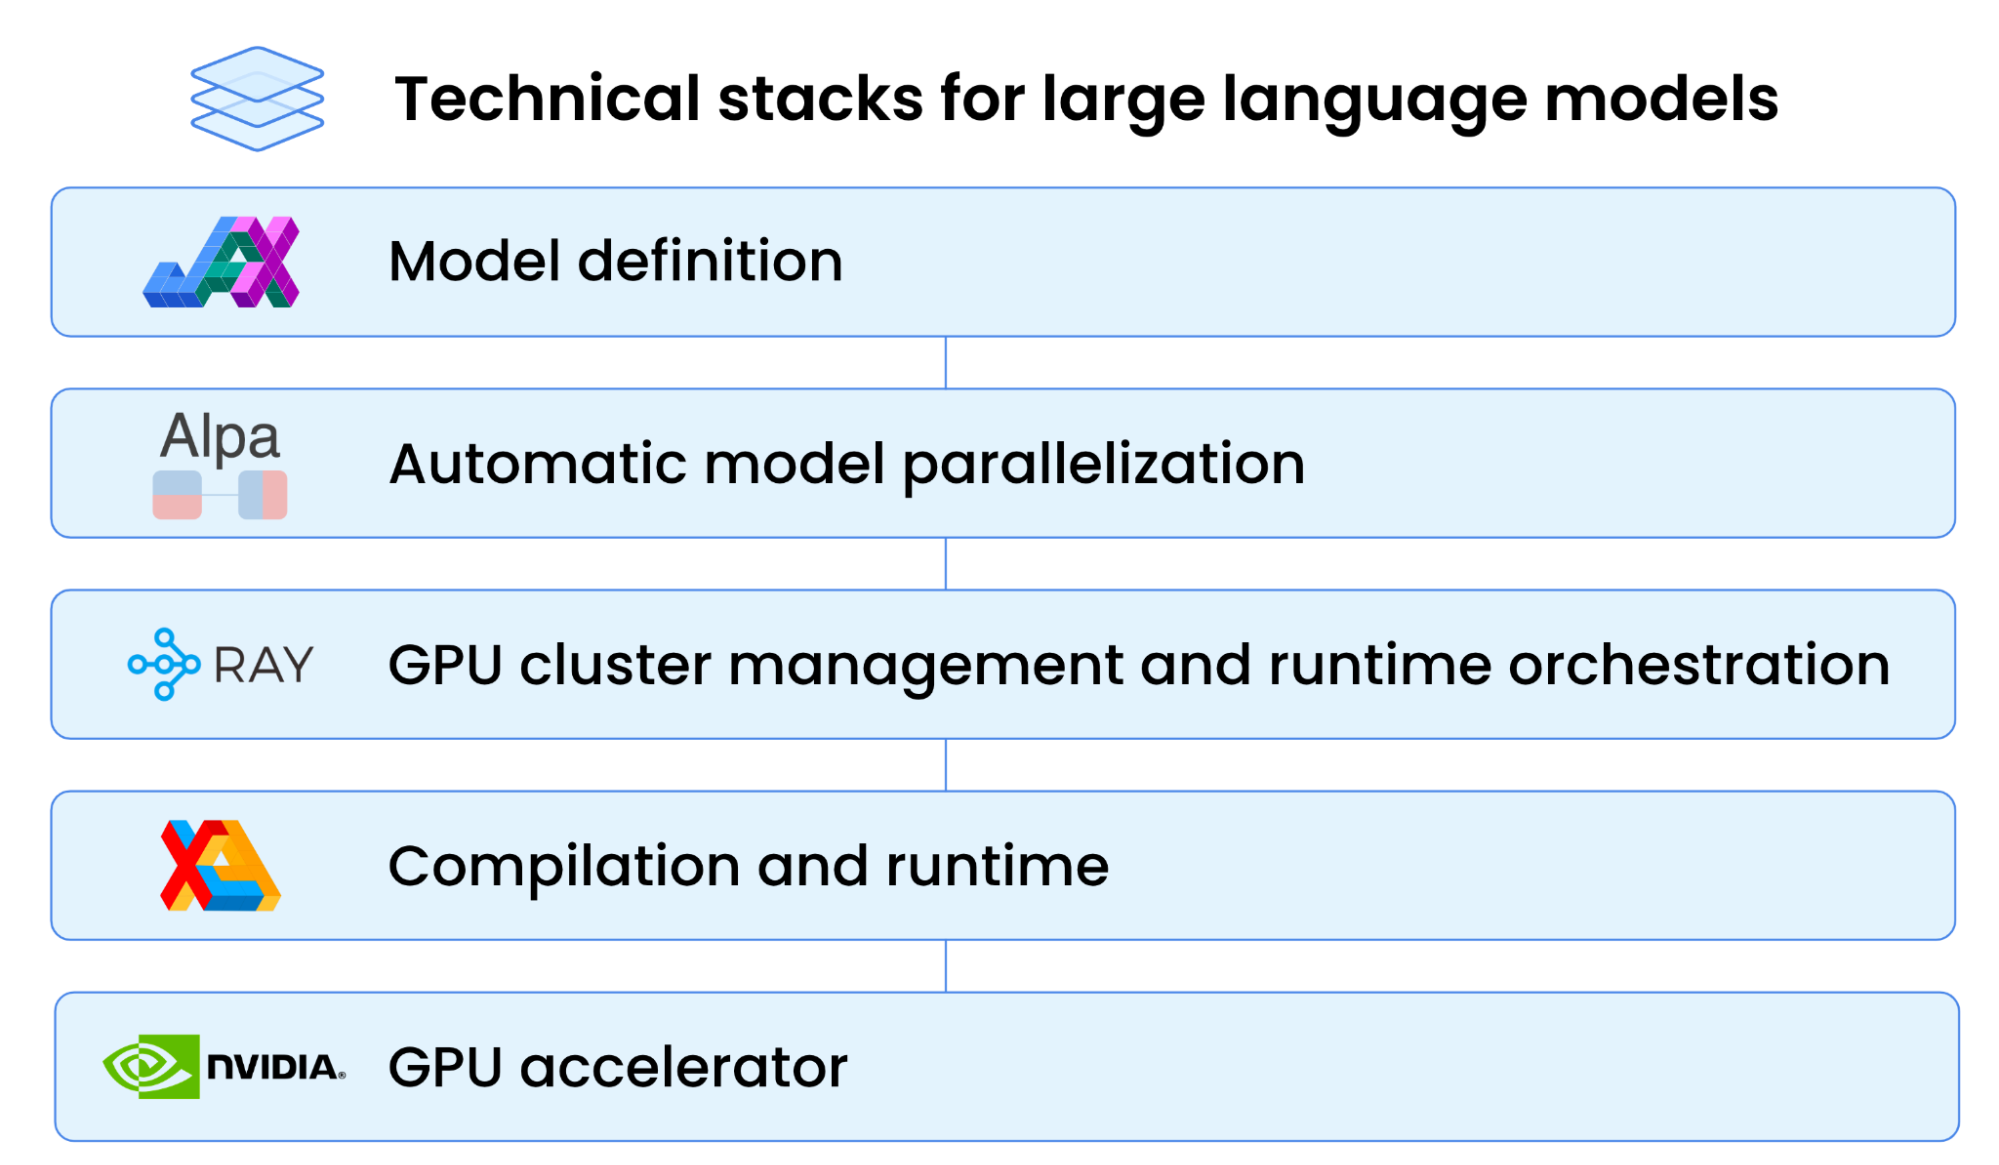 A logical tech stack for LLMs includes a GPU accelerator at the base (NVIDIA), followed by a compilation and runtime layer (XLA), GPU management and orchestration (RAY), automatic model parallelization (Alpa), and, finally, model definition (JAX) at the top. 